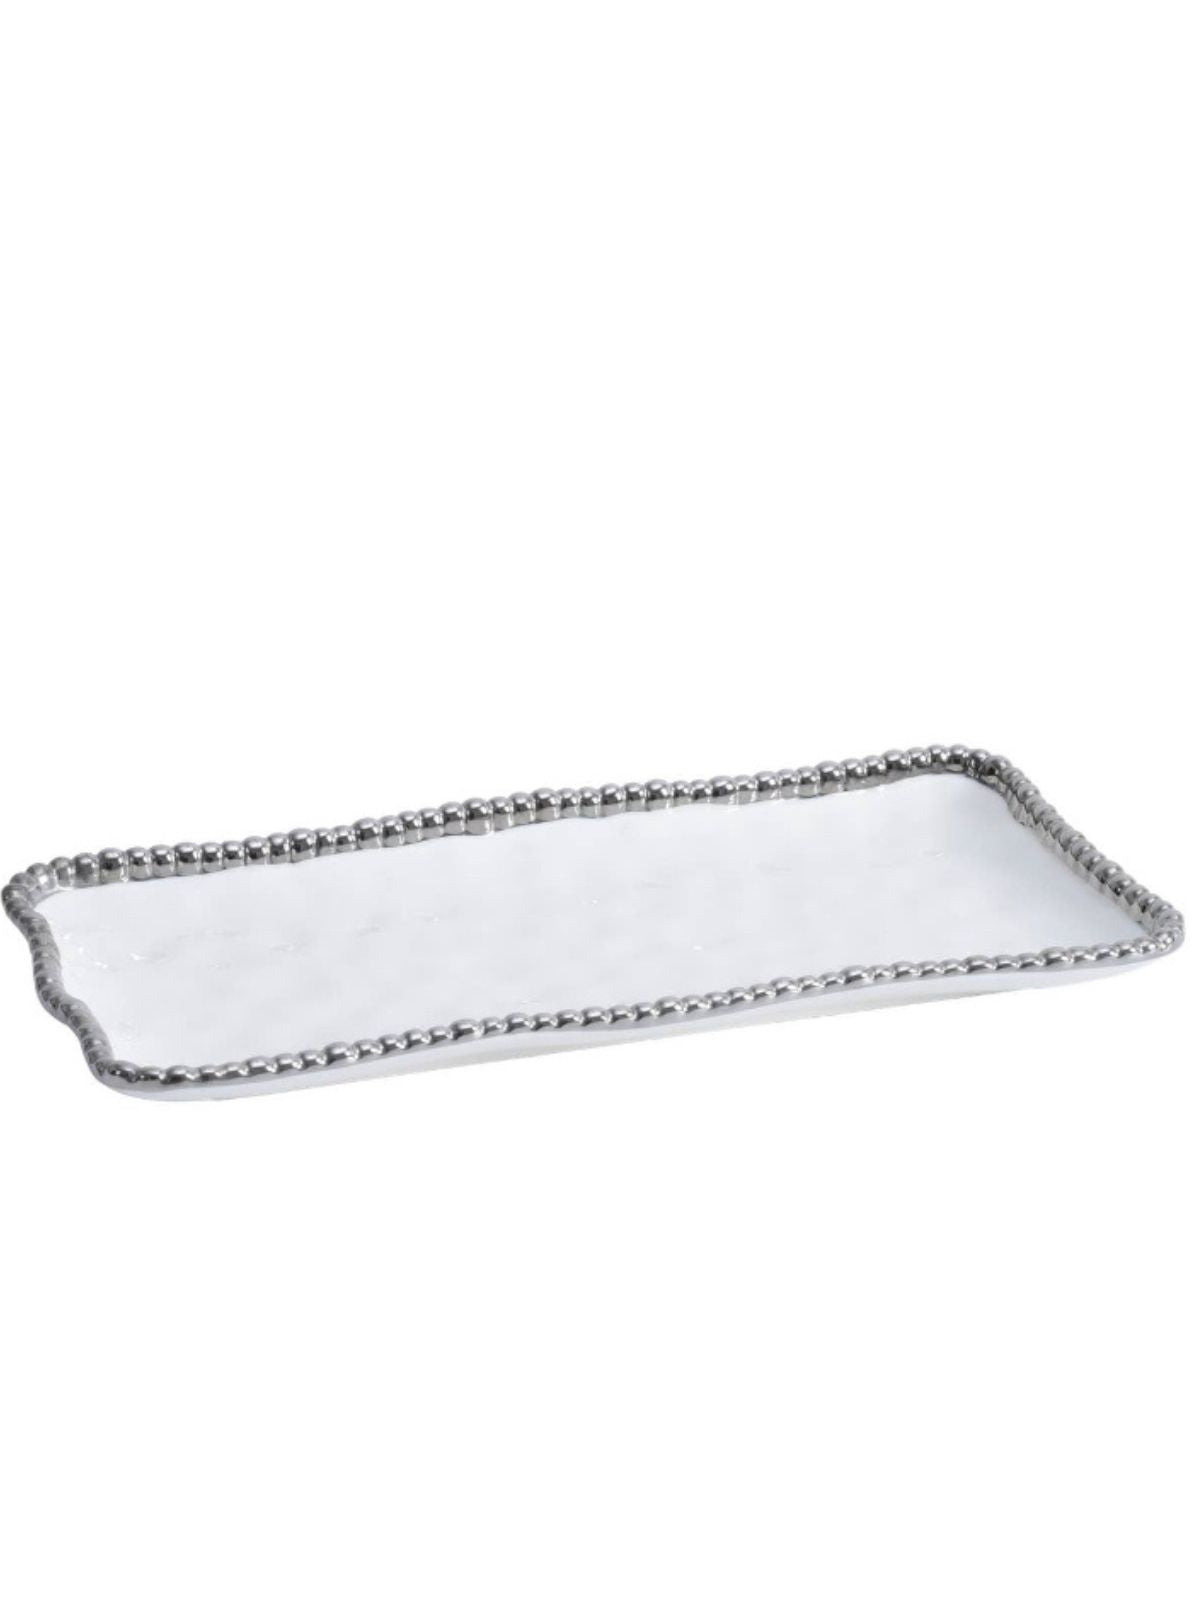 Rectangular Porcelain Serving Tray with Silver Beaded Edges